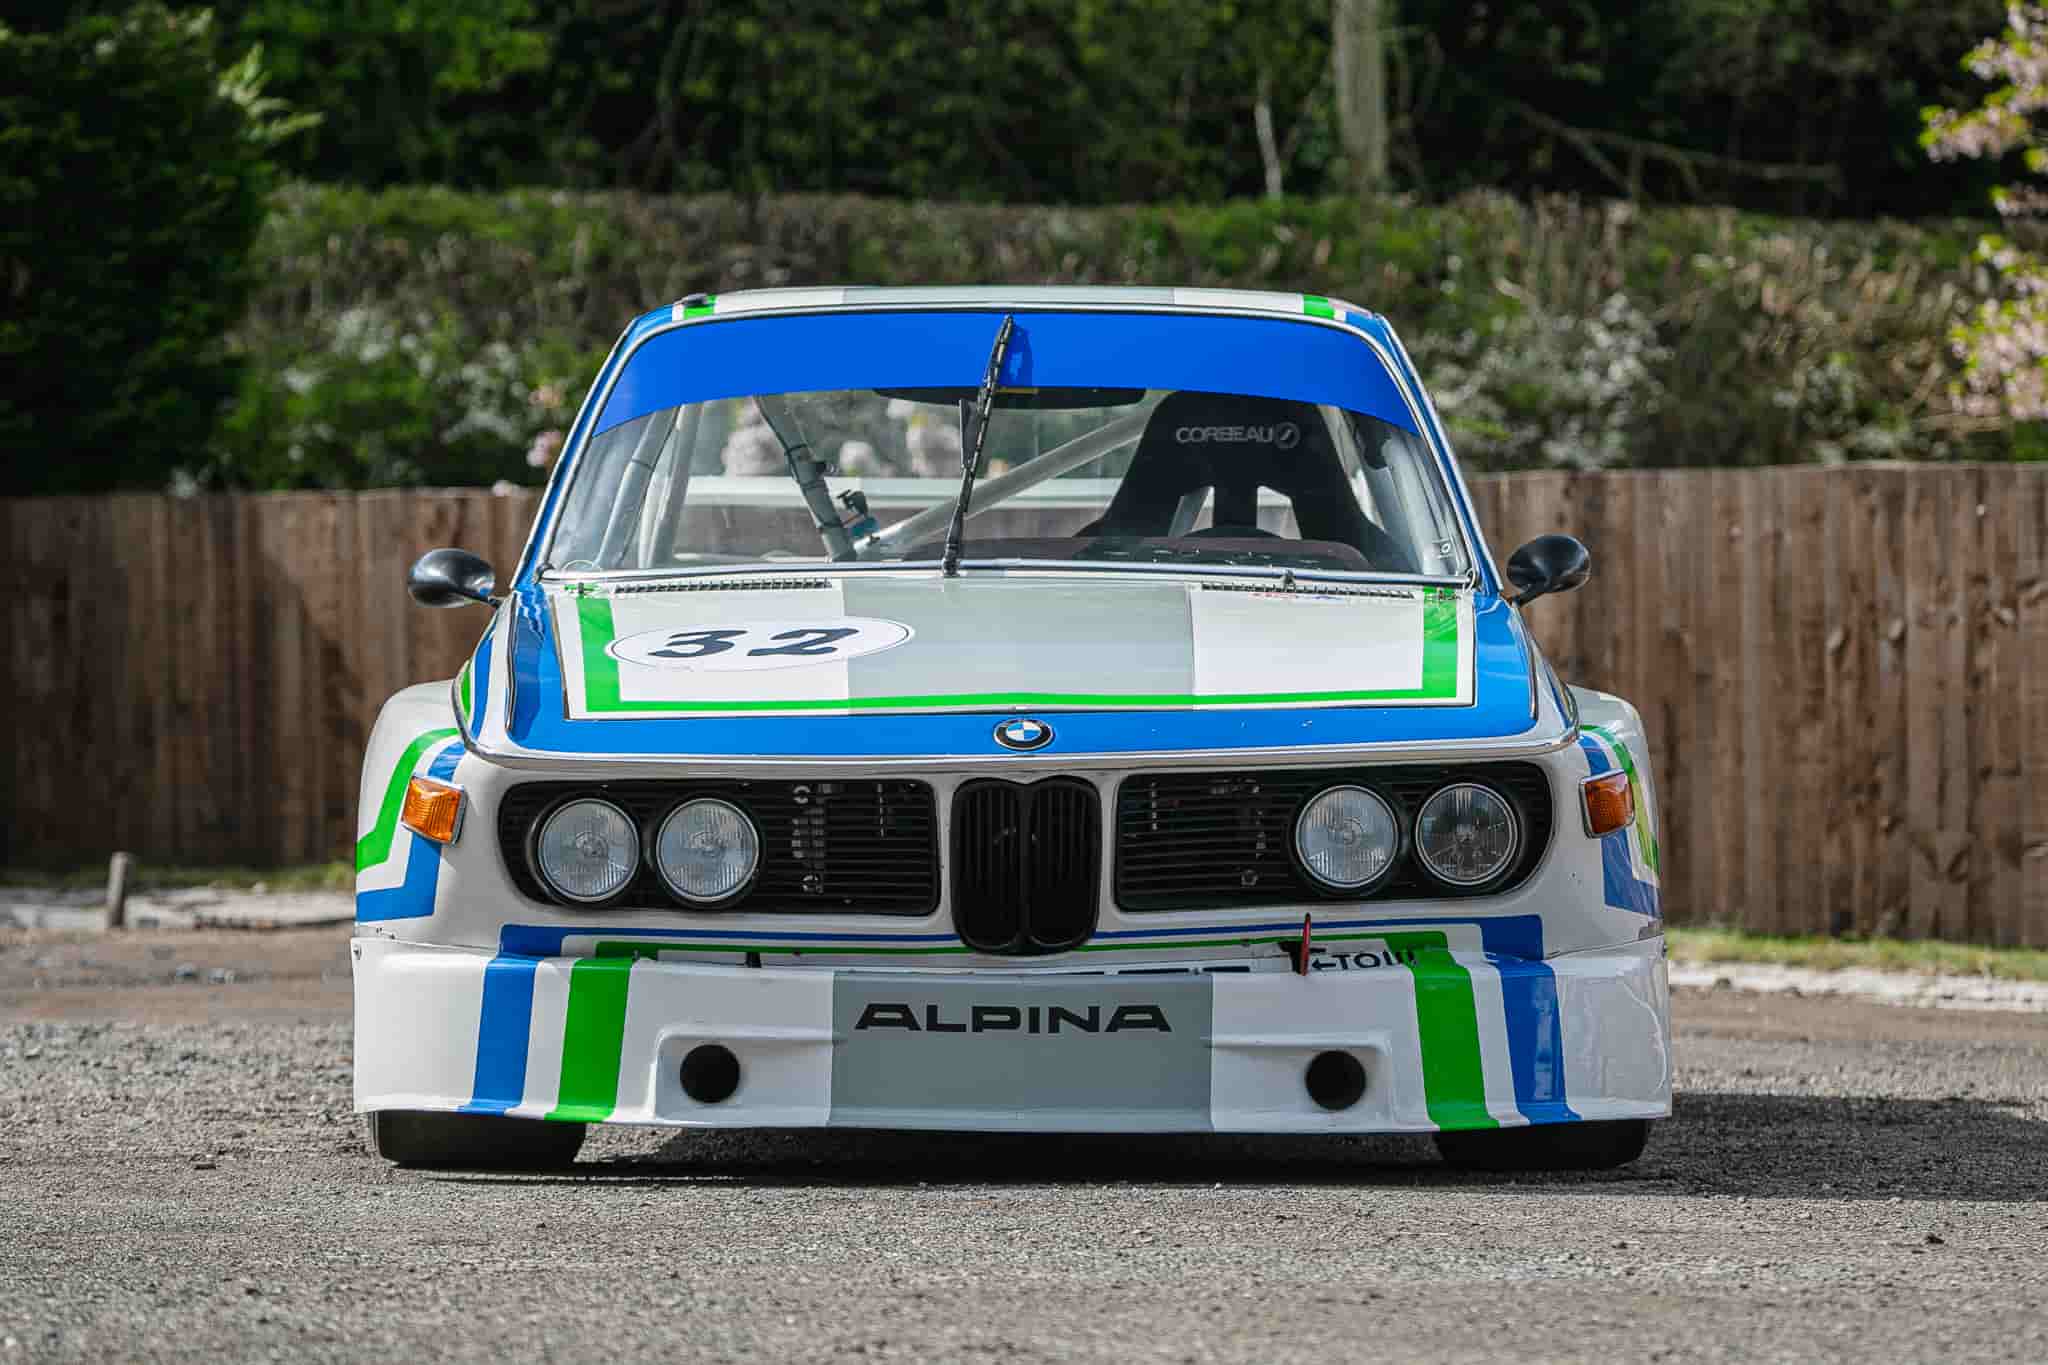 A 1973 BMW, once owned by Jamiroquai's Jay Kay, sold for £151,875 at auction. The 'CSL Batmobile' has a rich racing history and was auctioned at Sywell Aerodrome.